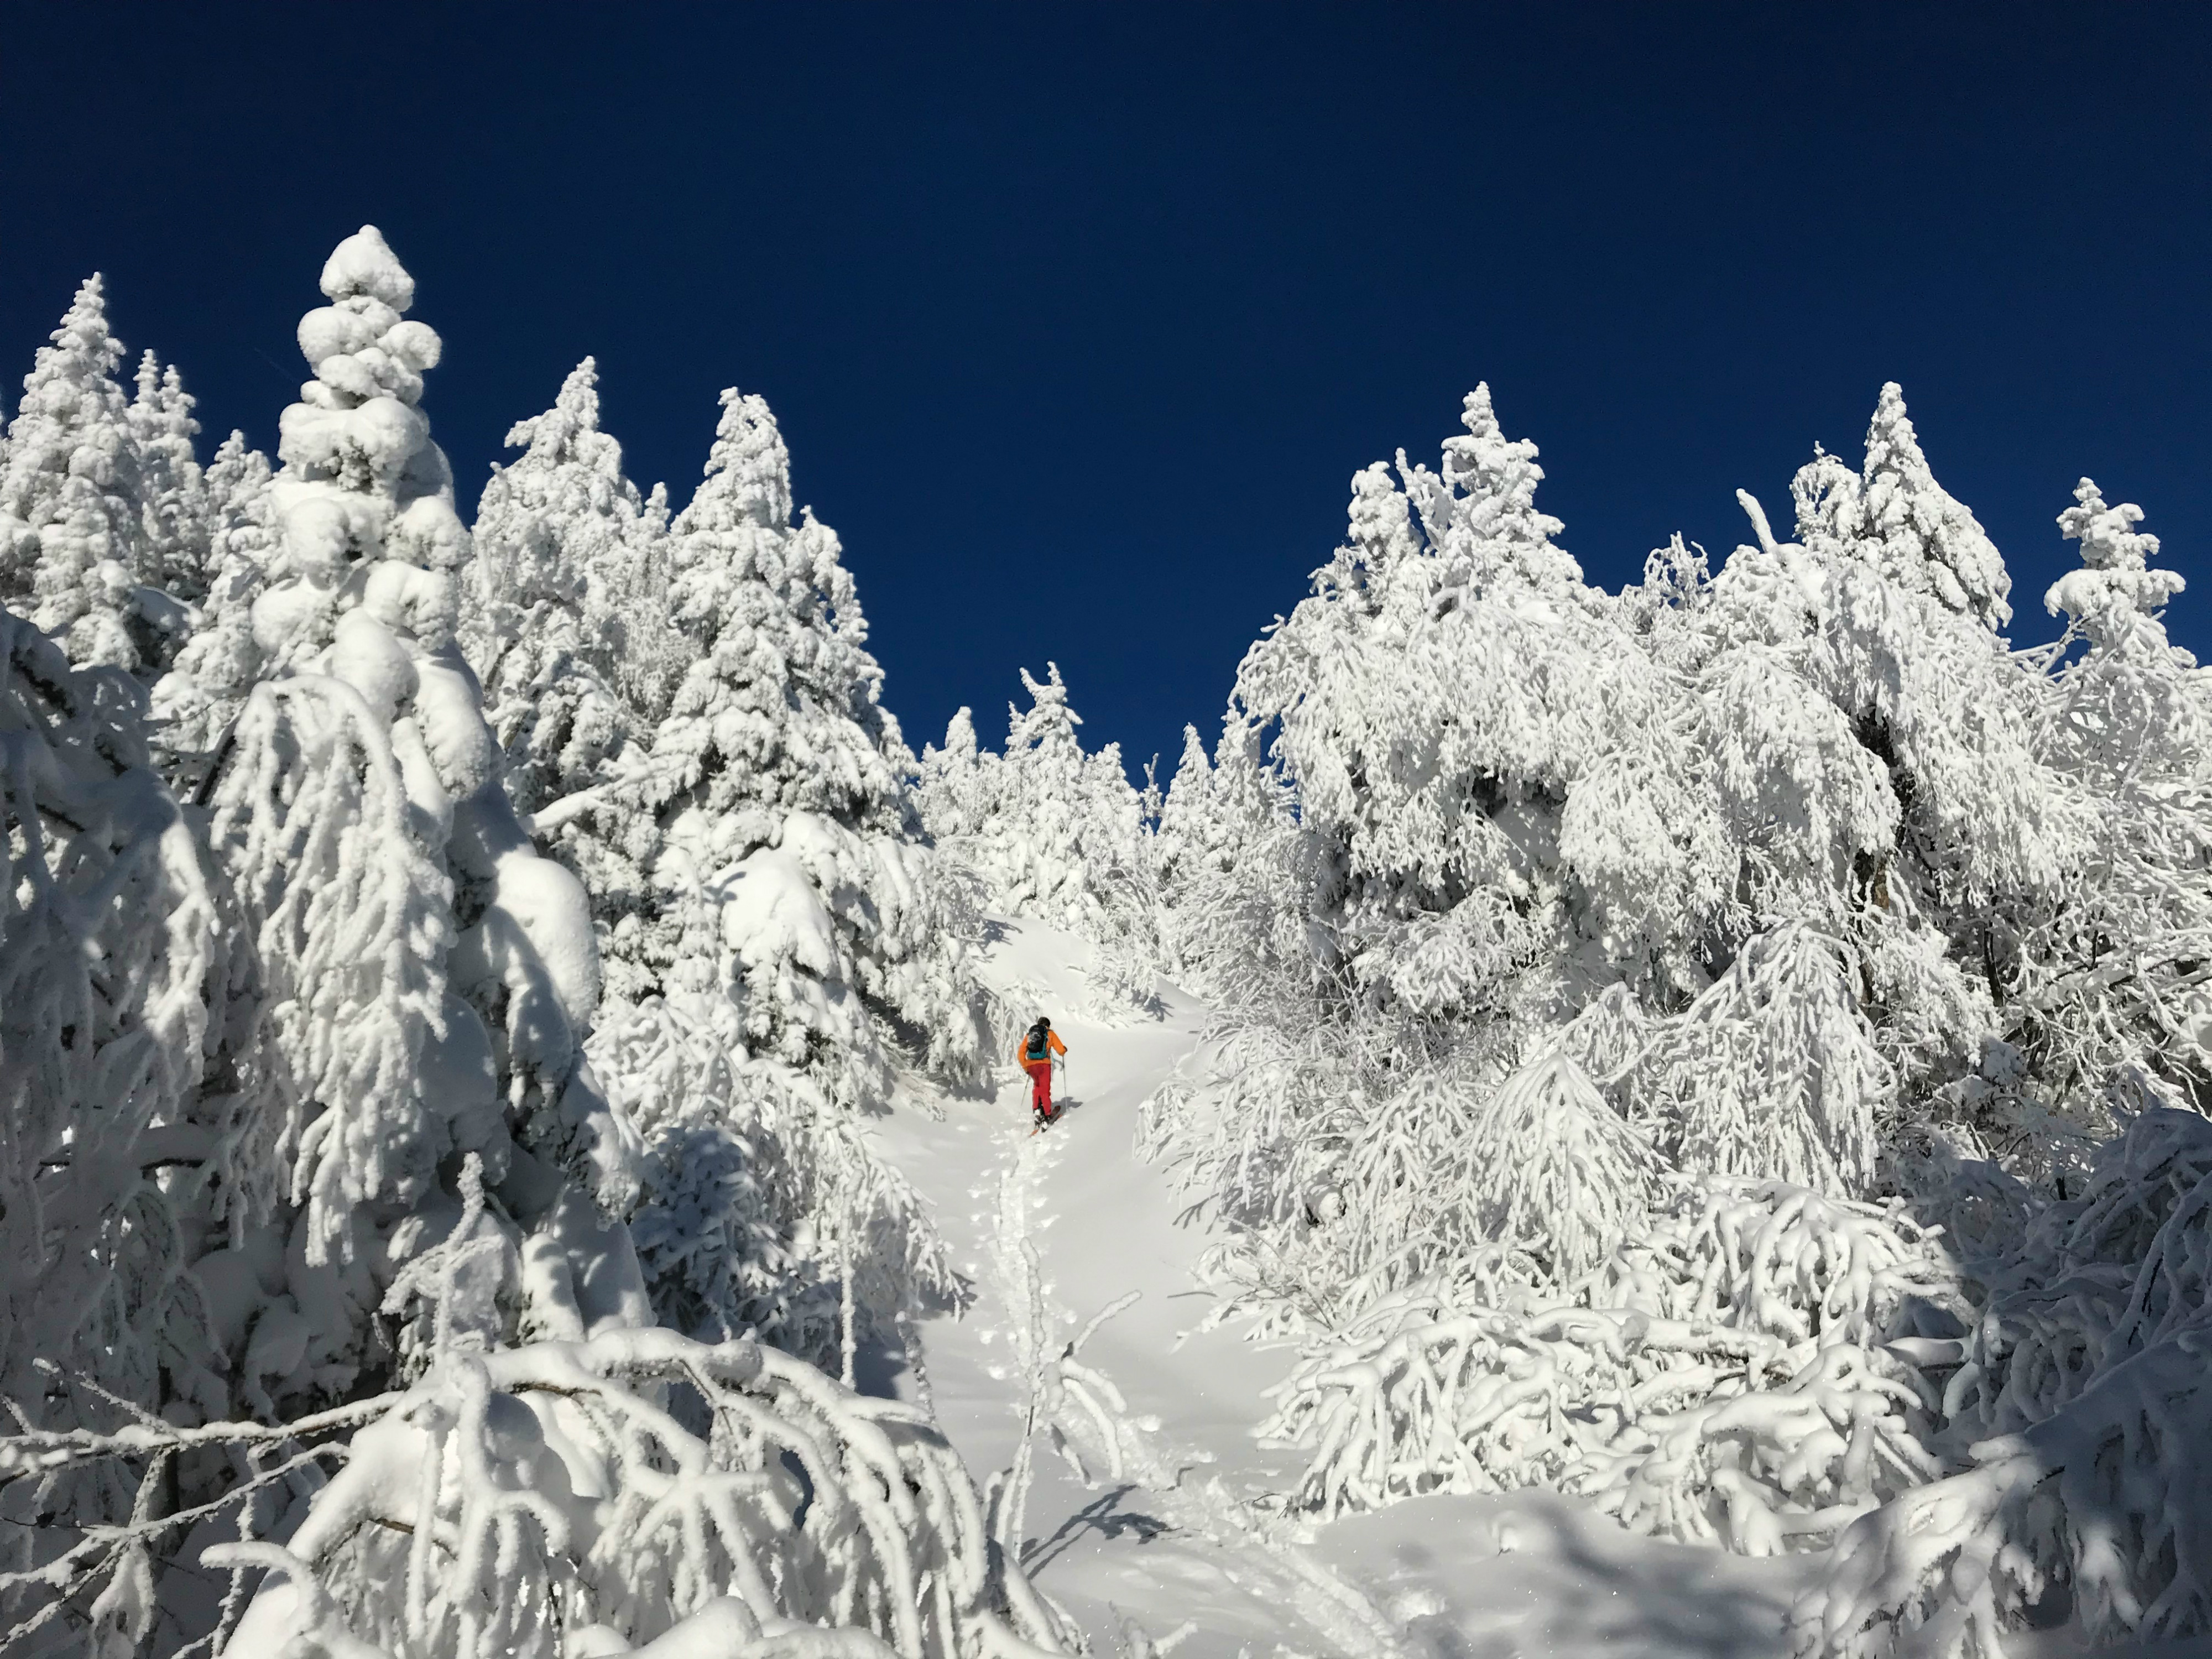 A skier climbs high into the Vermont backcountry at Bolton Valley Resort. Backcountry skiing is among the hottest trends on the Vermont alpine skiing scene this season. (Photo by Adam DesLauriers)